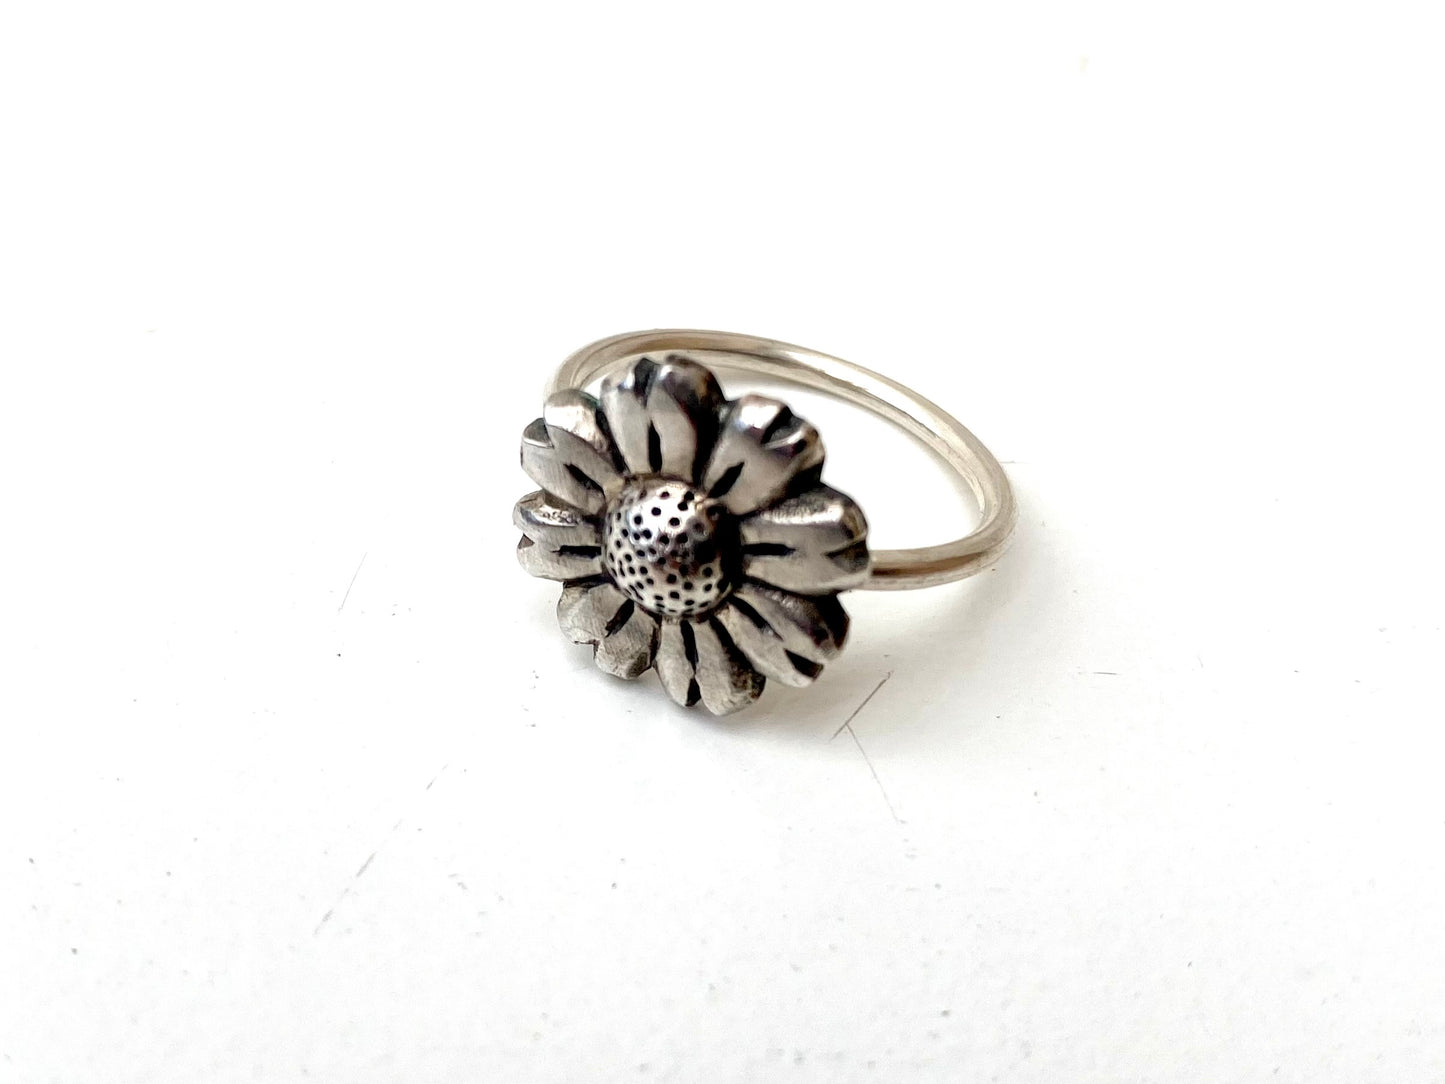 Close-up of the oxidised Daisy Flower Ring next to a brass and silver variation, highlighting the textural contrast